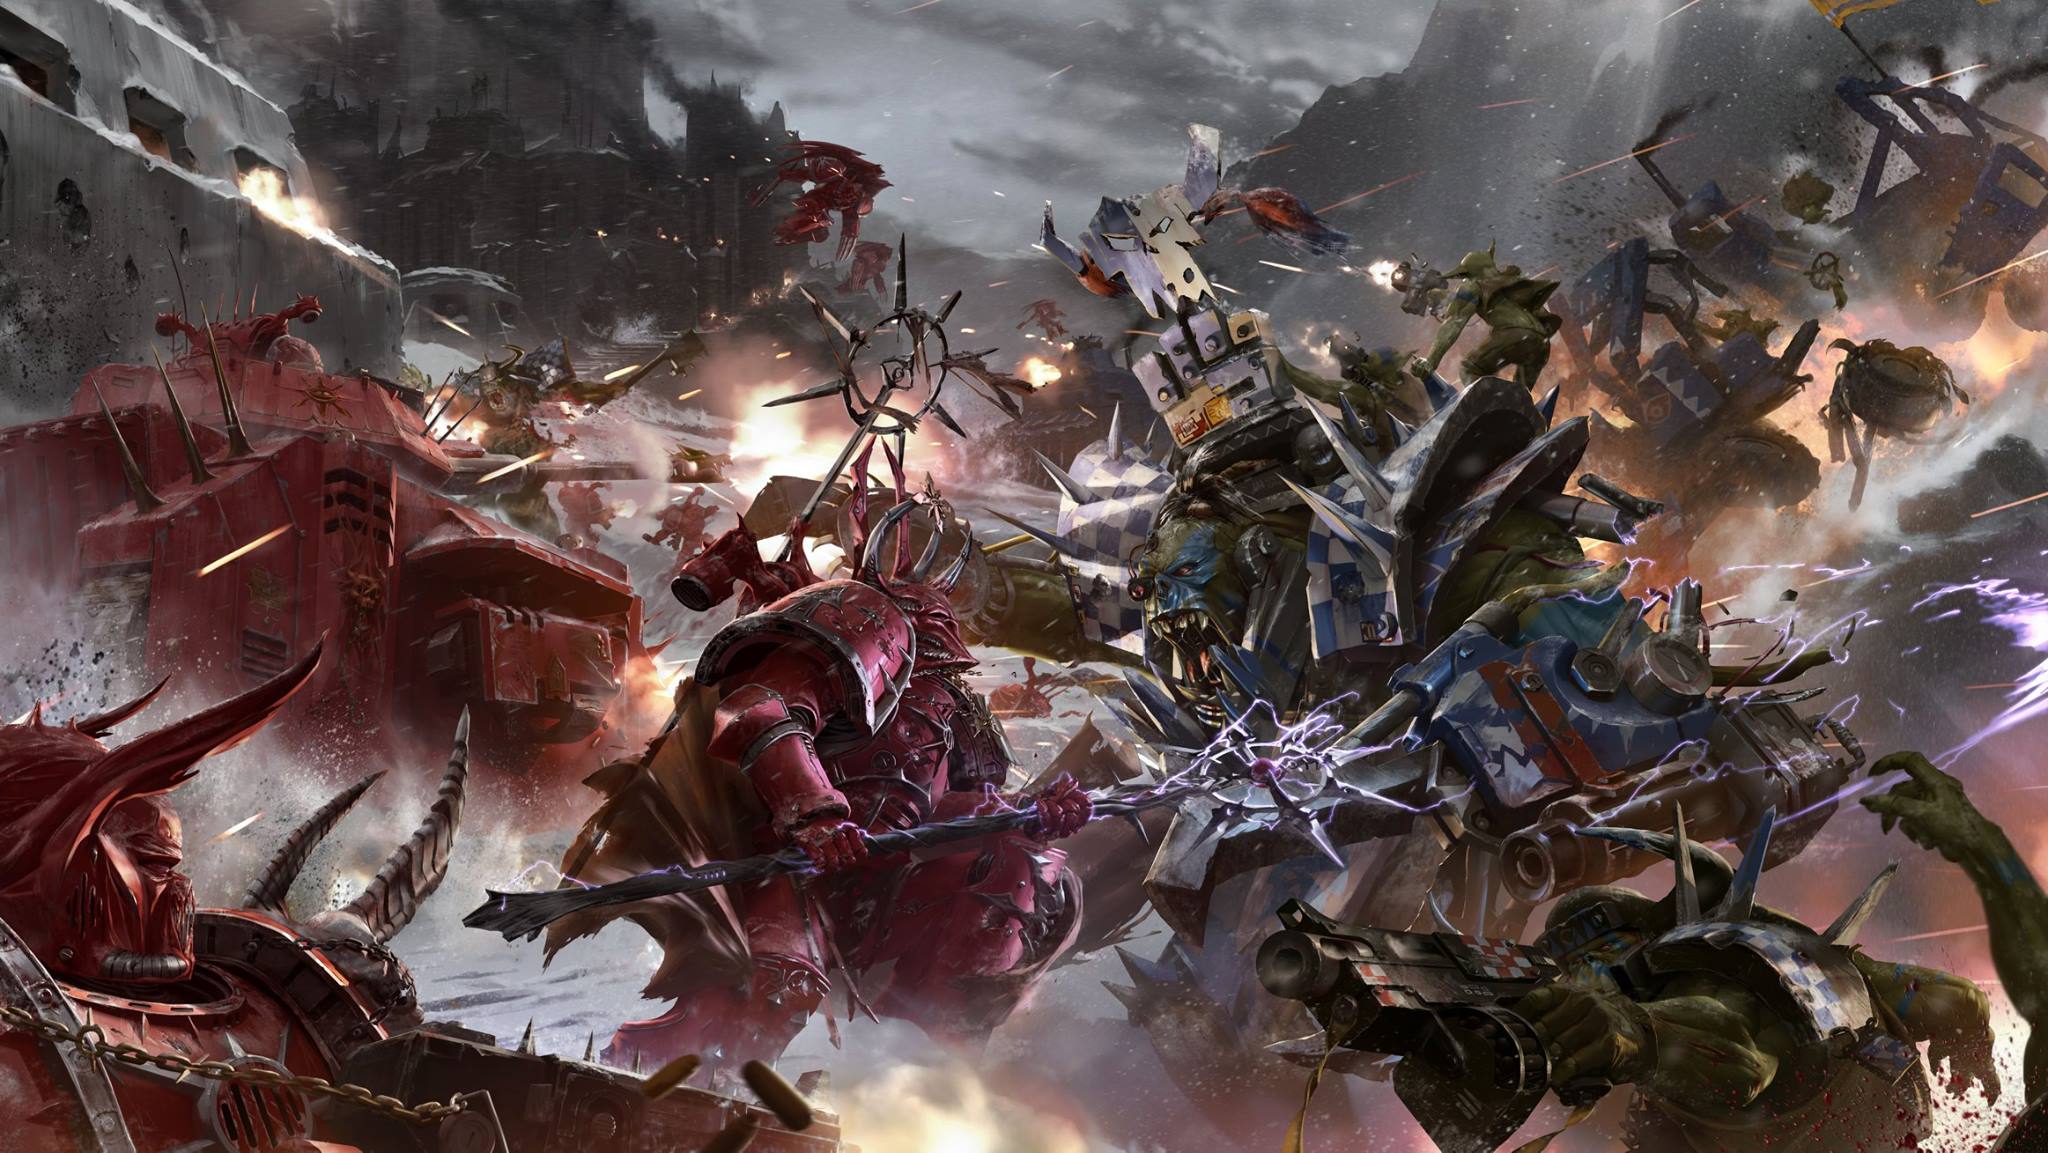 Amazing Warhammer 40,000: Eternal Crusade Pictures & Backgrounds